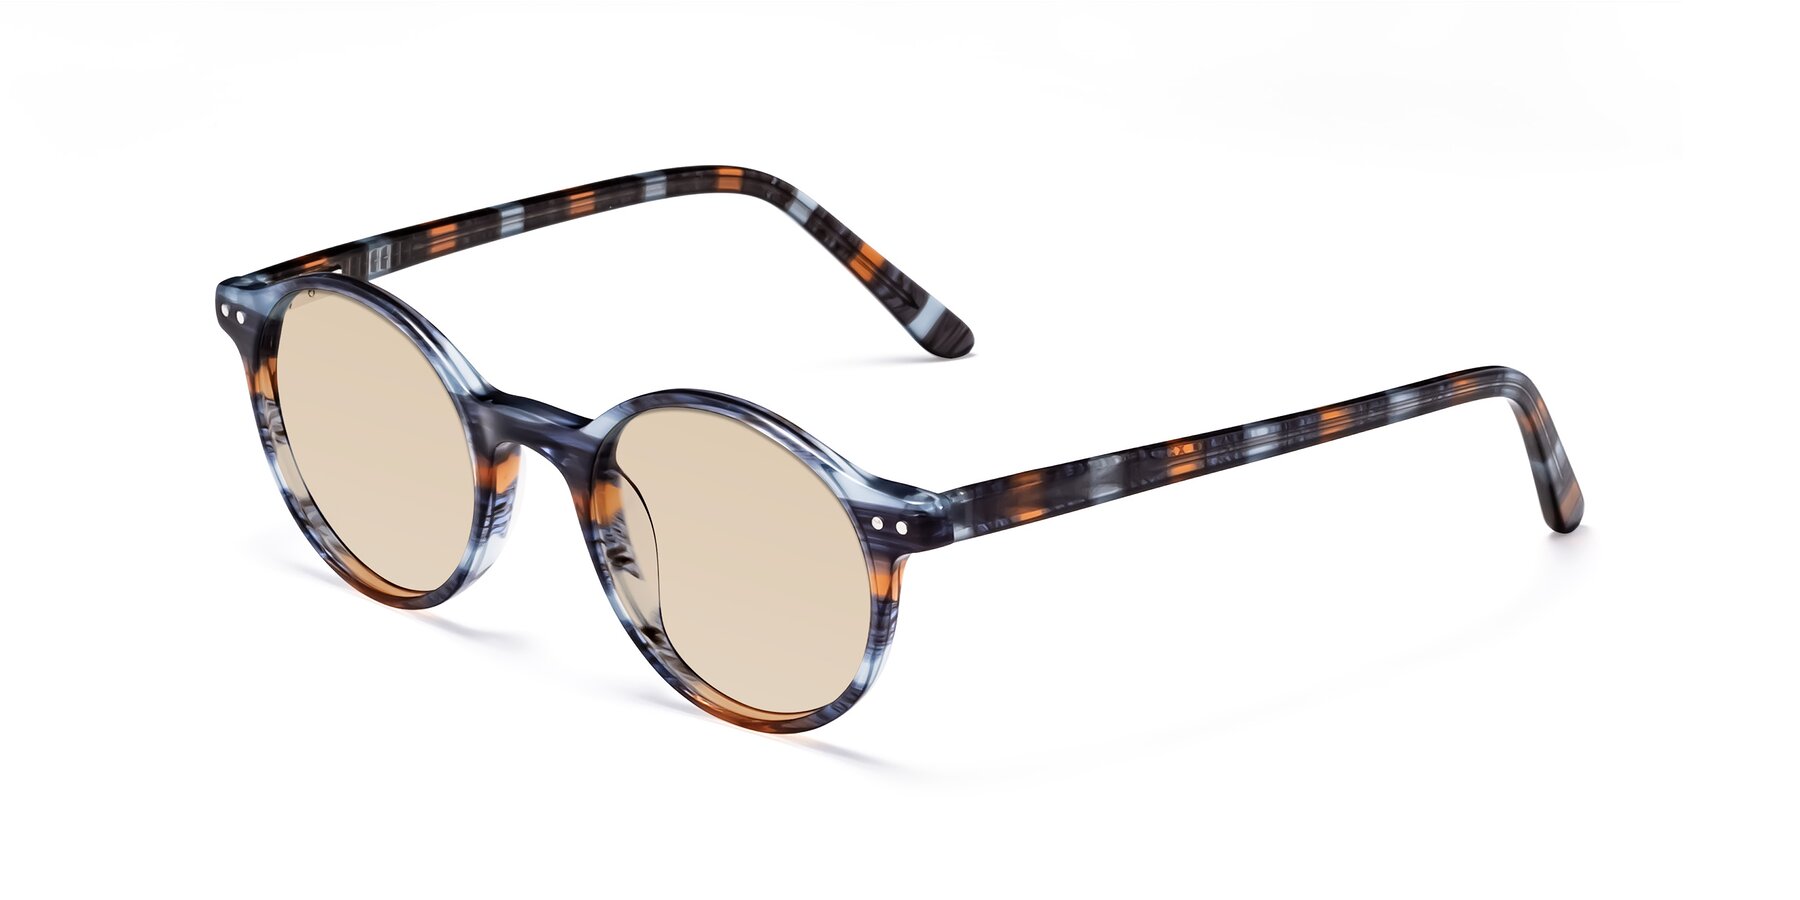 Angle of Jardi in Stripe Blue Brown with Light Brown Tinted Lenses